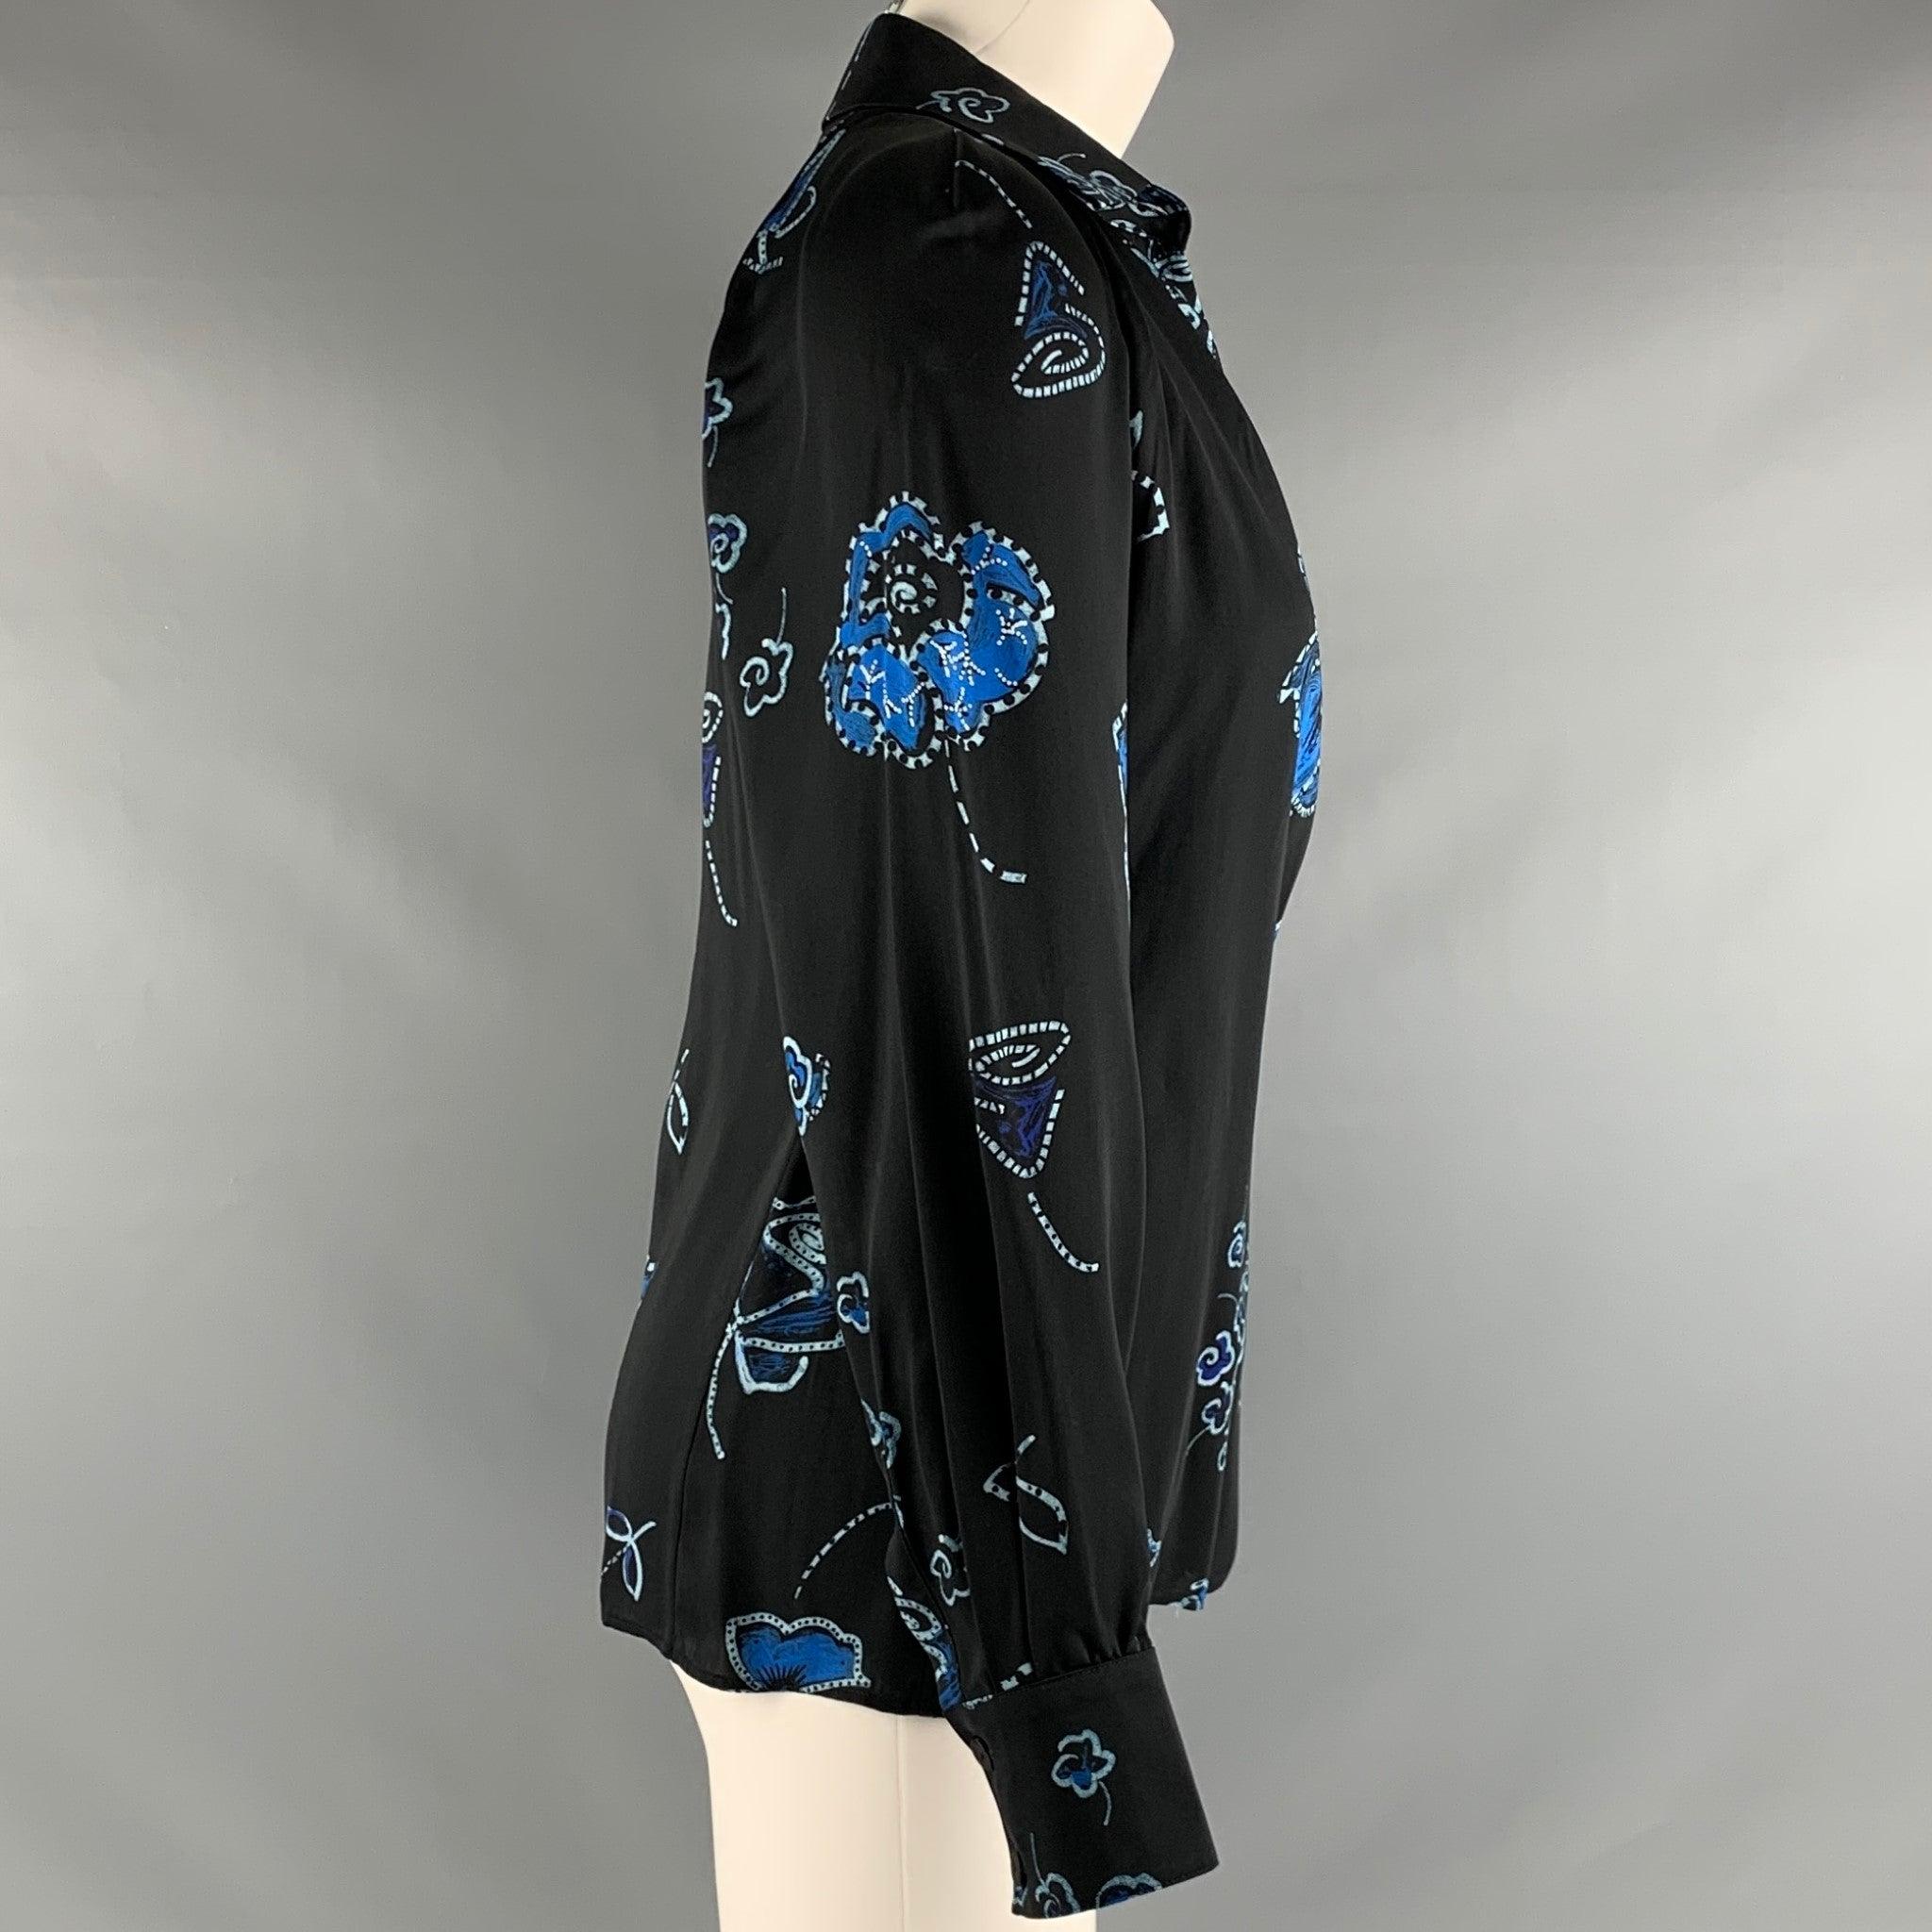 EMPORIO ARMANI
top in black viscose featuring blue floral pattern, wrap style, blouson sleeves, and a button closure.Very Good Pre-Owned Condition. Moderate signs of wear. 

Marked:   38 

Measurements: 
 
Shoulder: 15 inches Bust: 30 inches Sleeve: